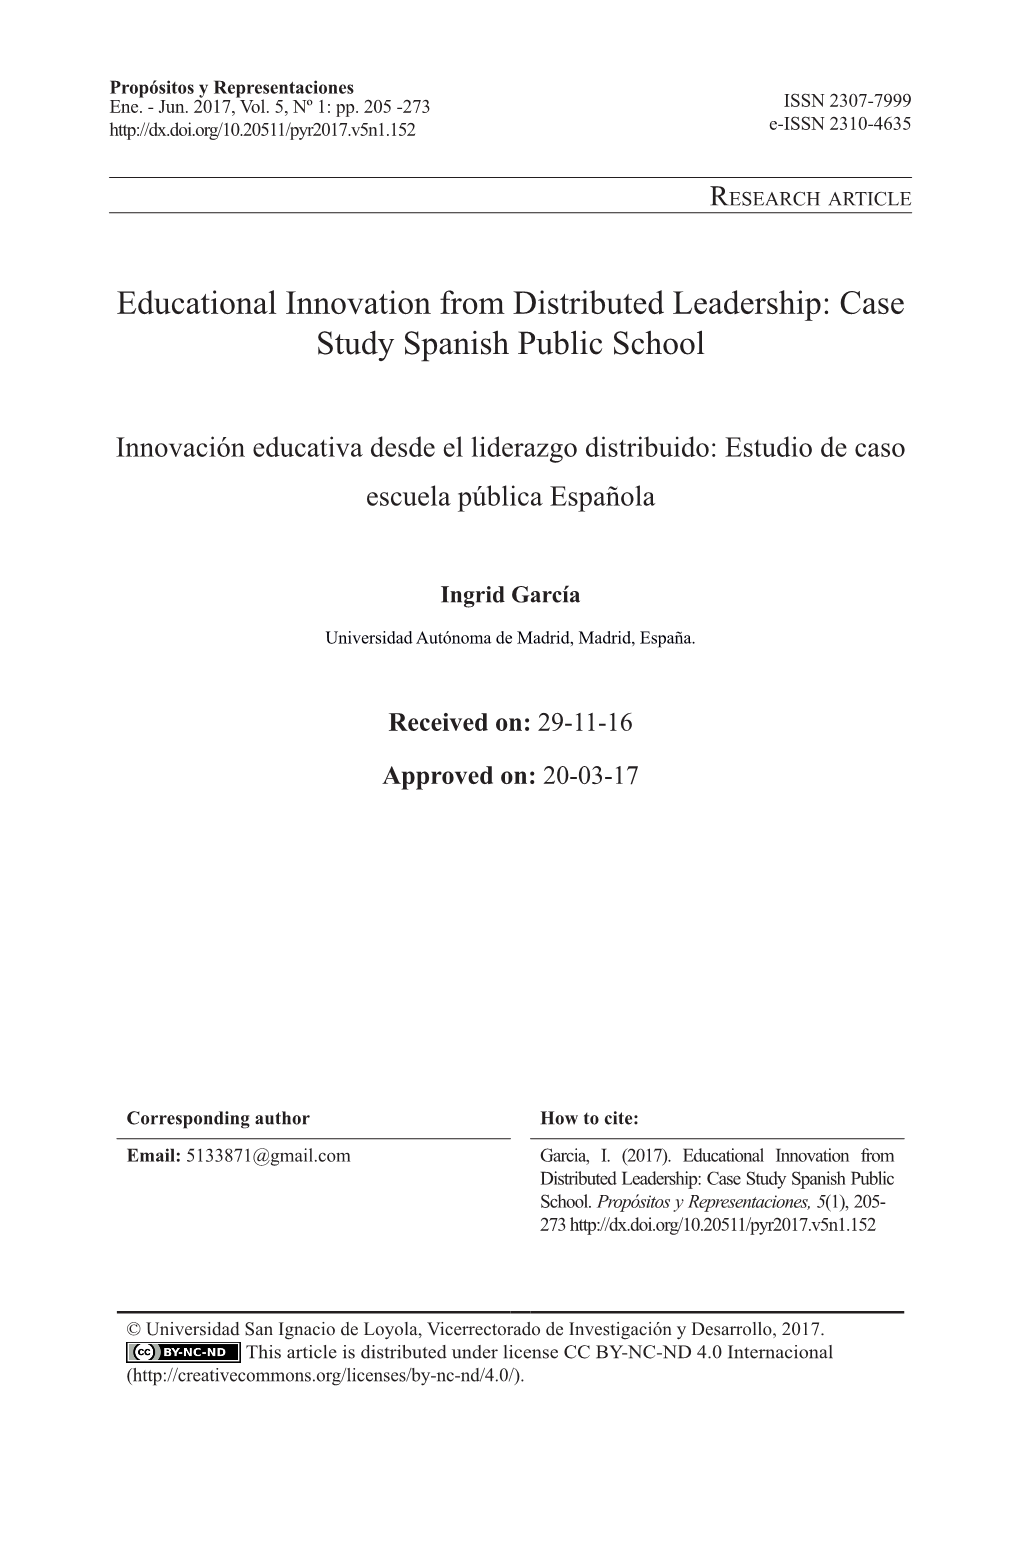 Educational Innovation from Distributed Leadership: Case Study Spanish Public School